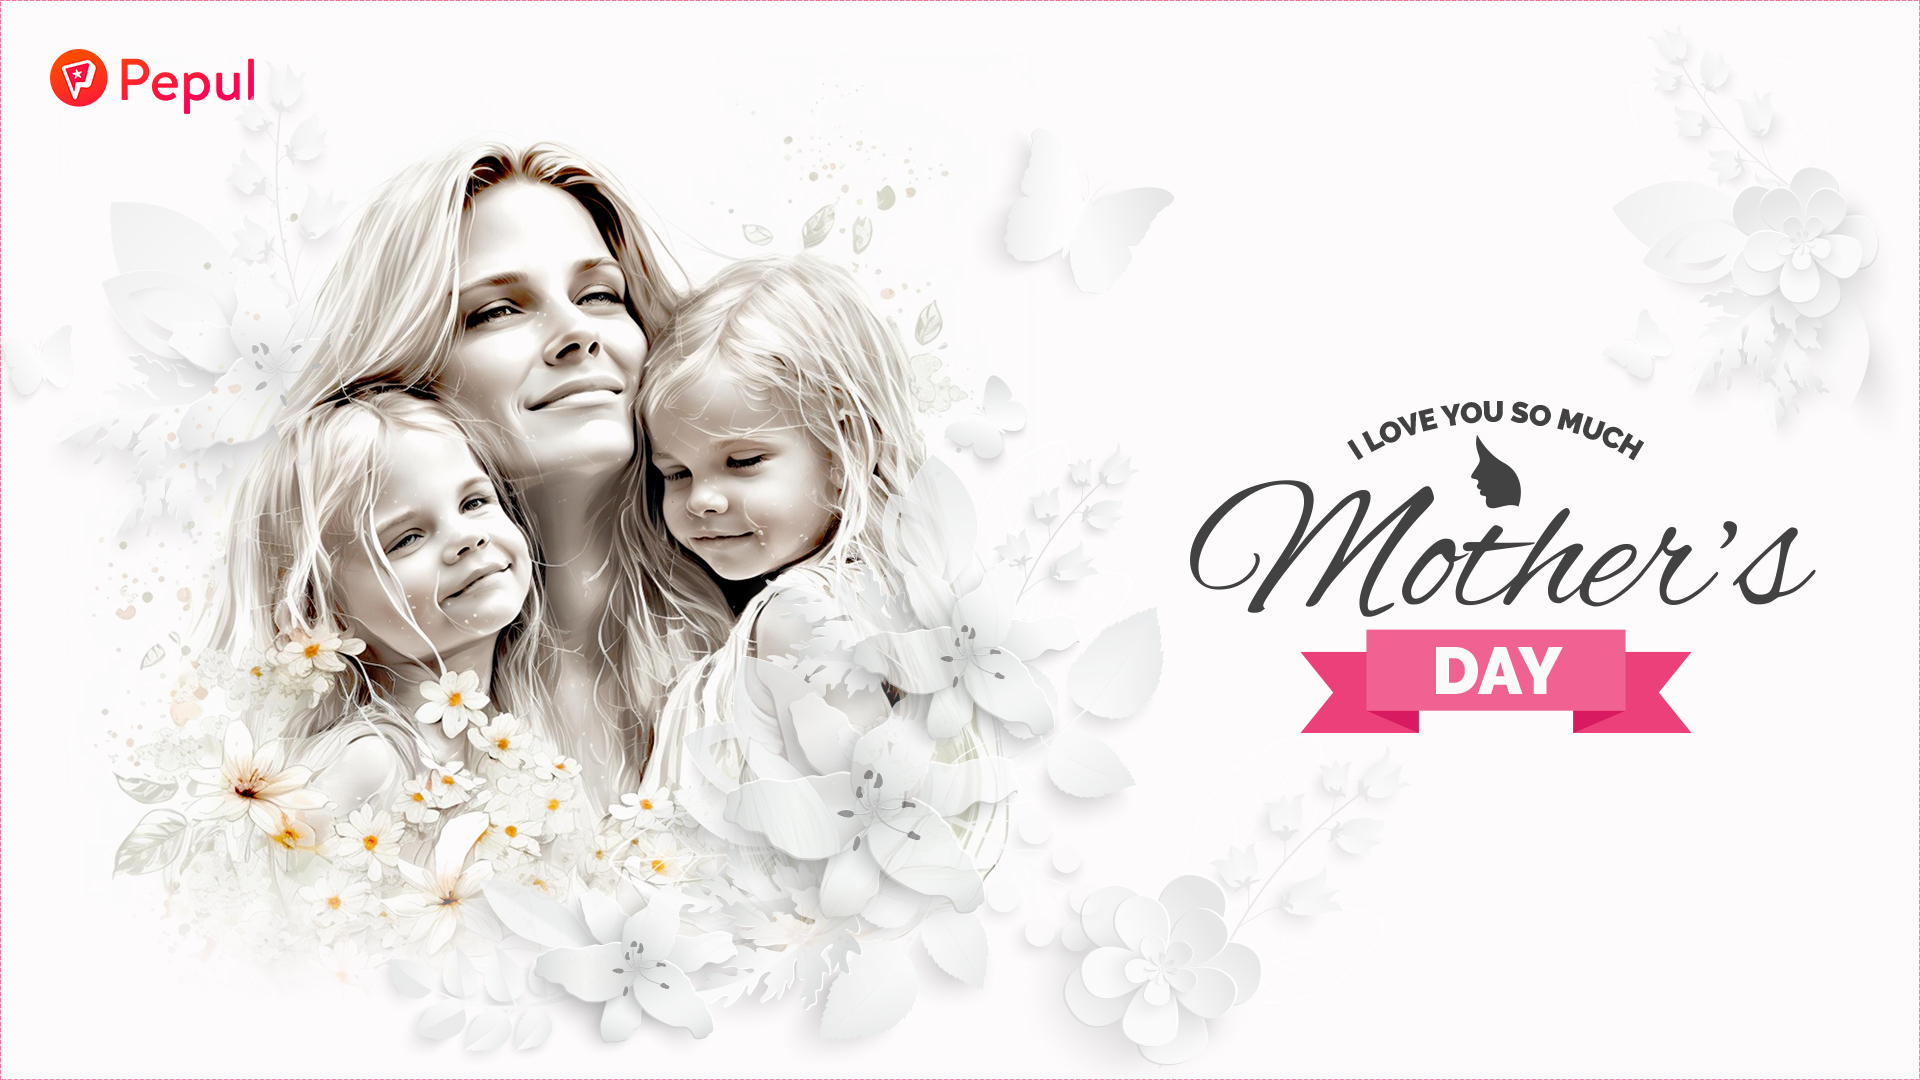 Best Happy Mother’s Day Pictures Wishes, Greetings, Messages & Quotes